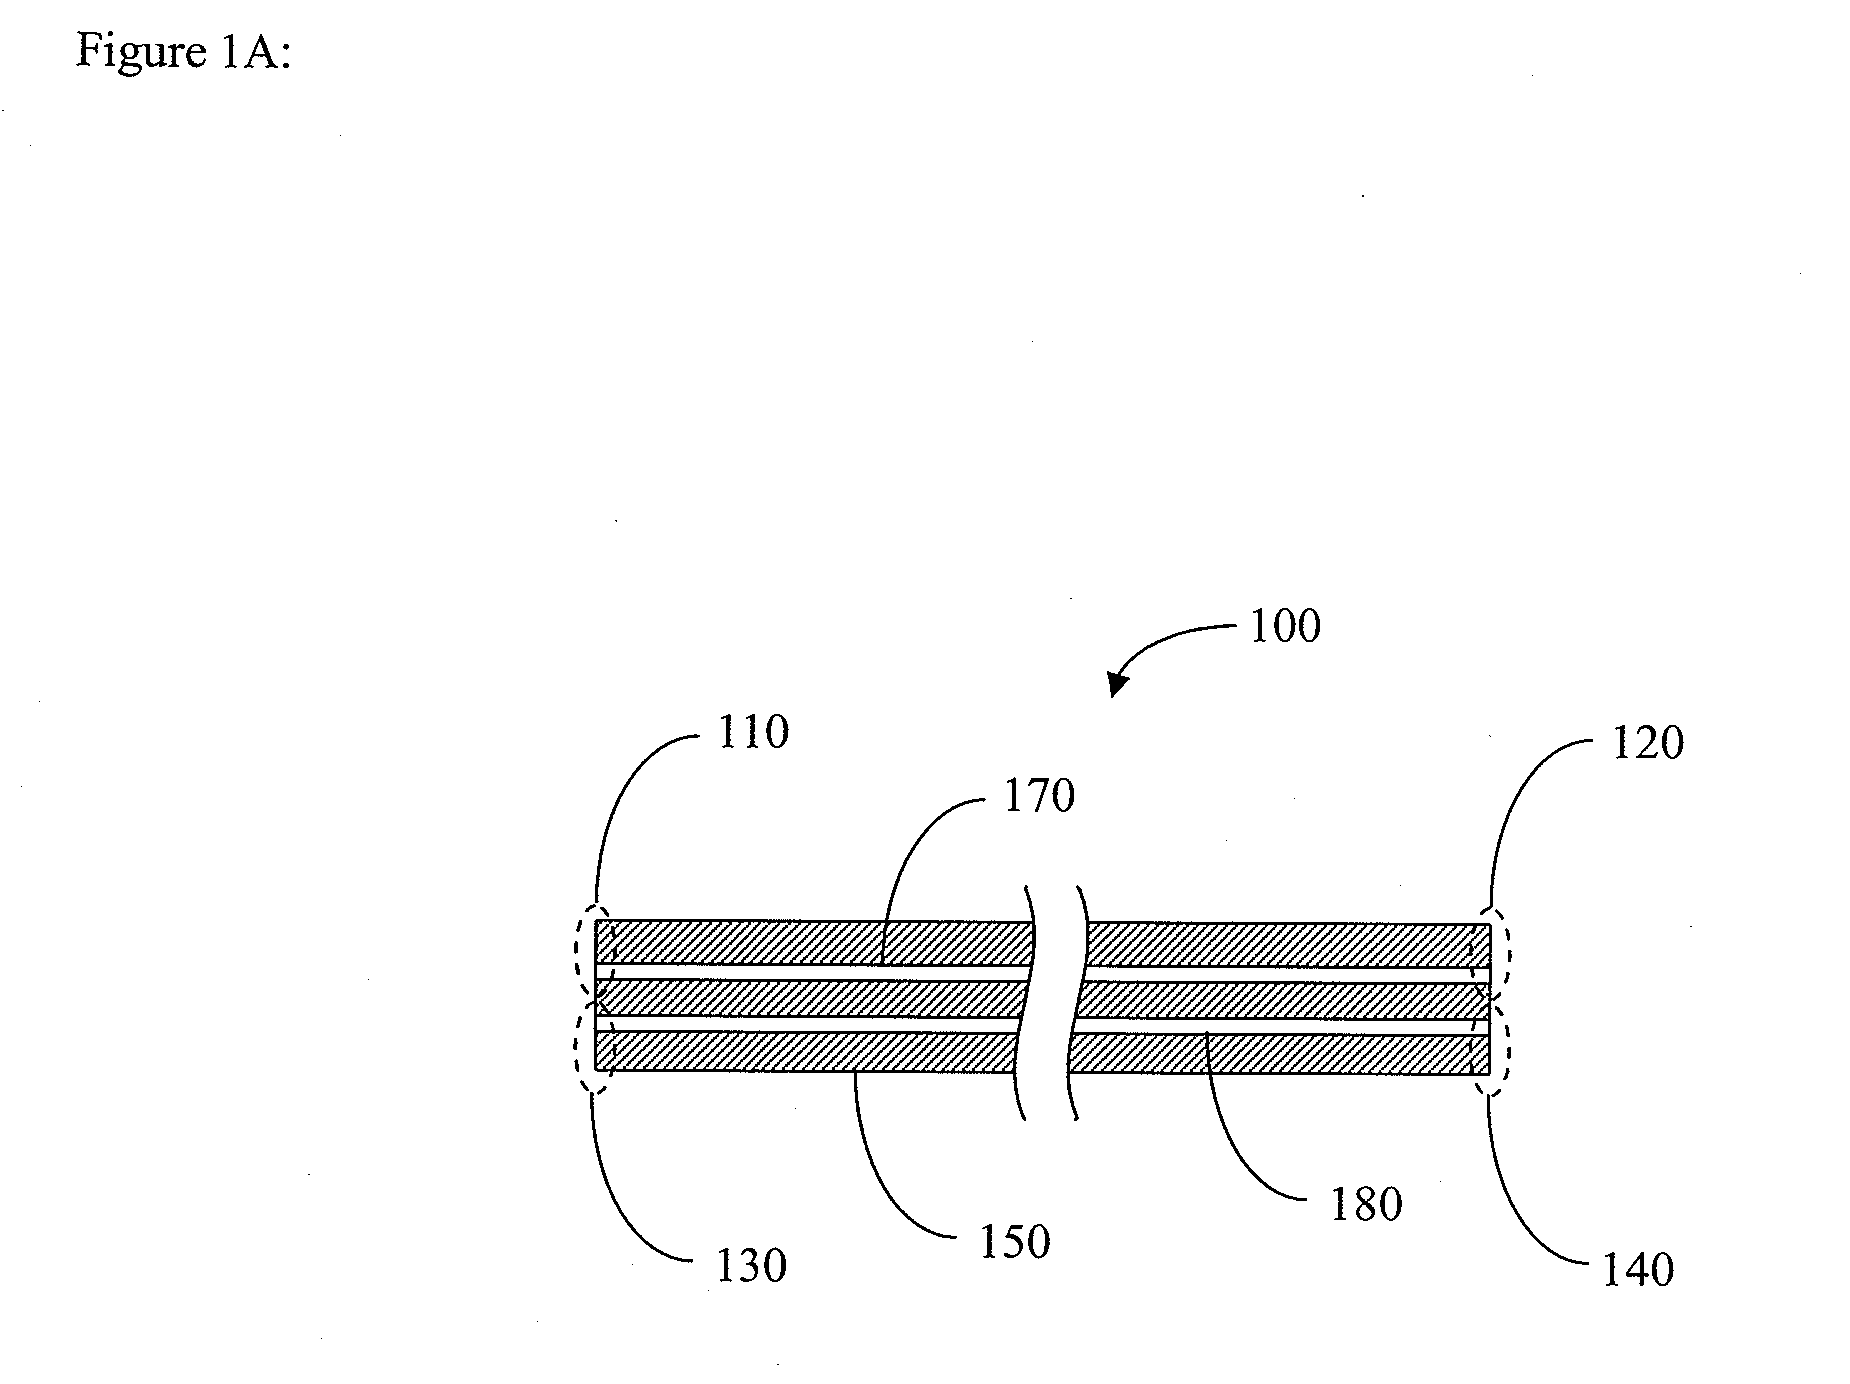 Multiple-core photonic-bandgap fiber with coupling between the cores